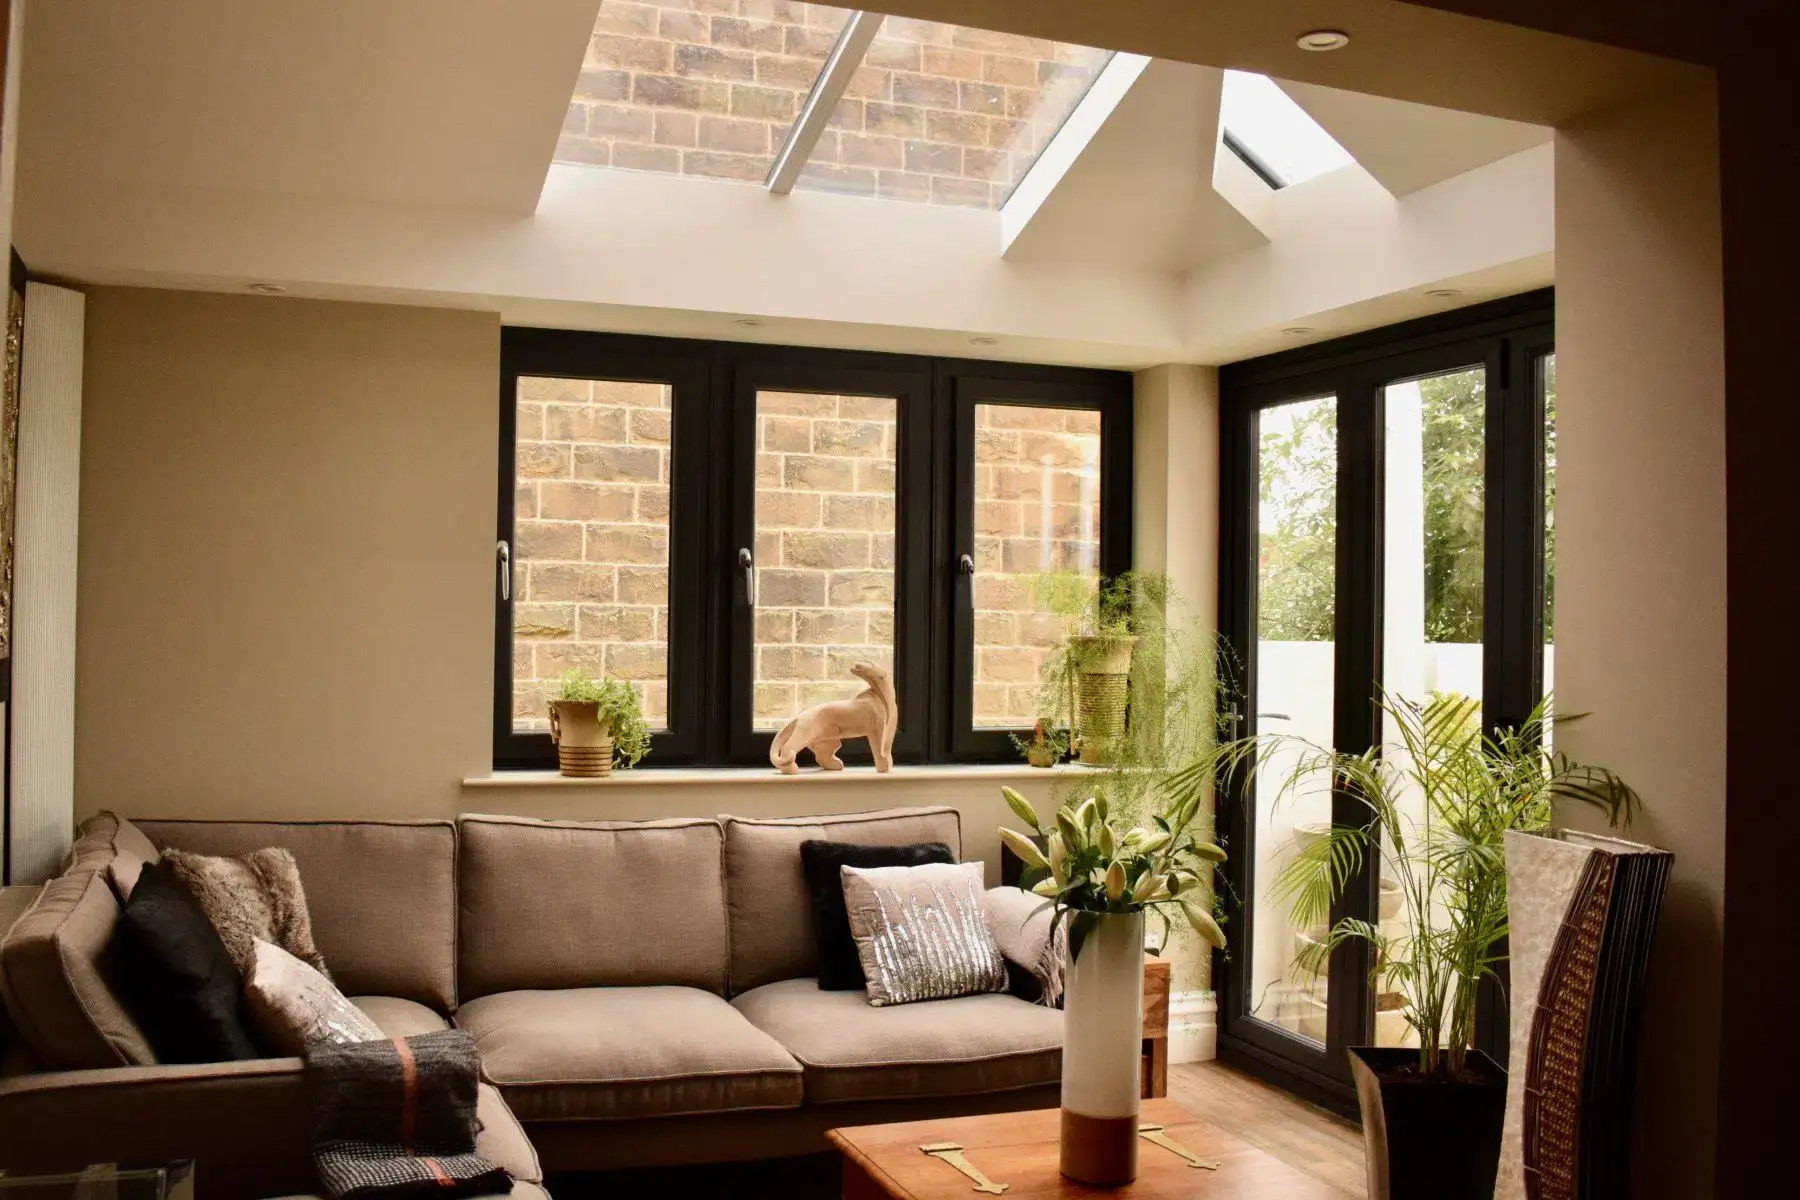 Excellent Windows Extensions in basingstoke